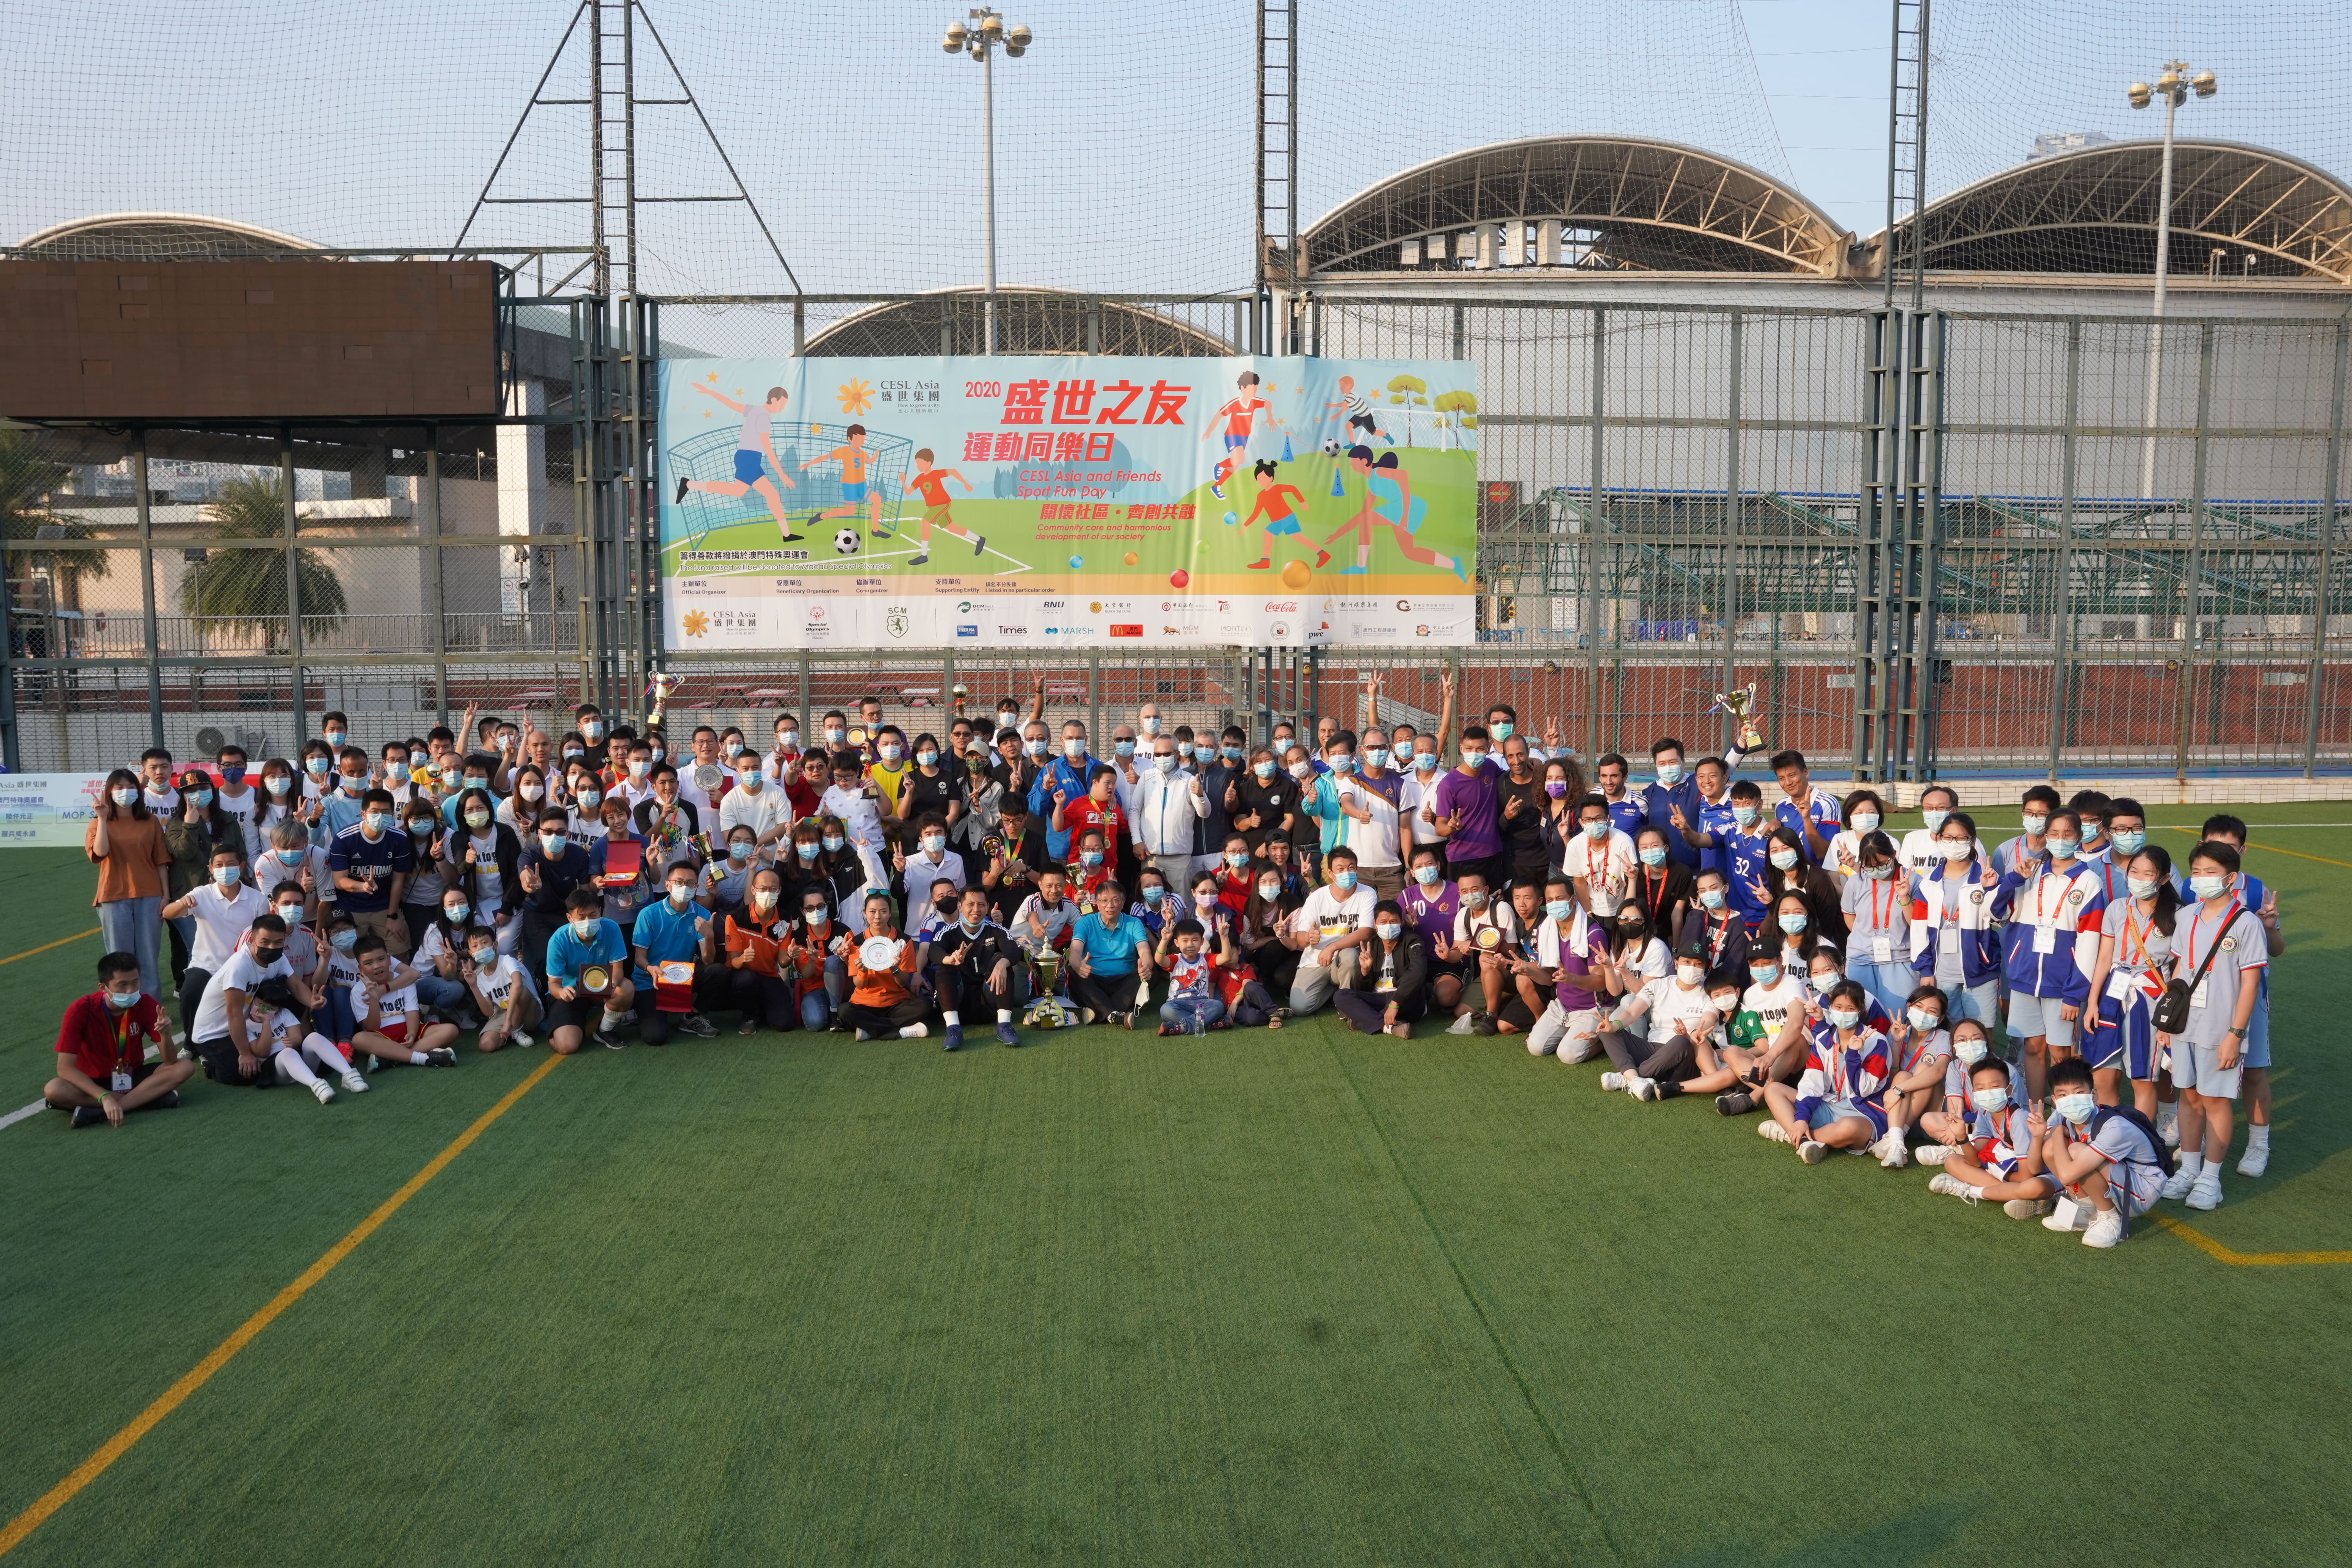 CESL Asia and Friends Sport Fun Day 2020